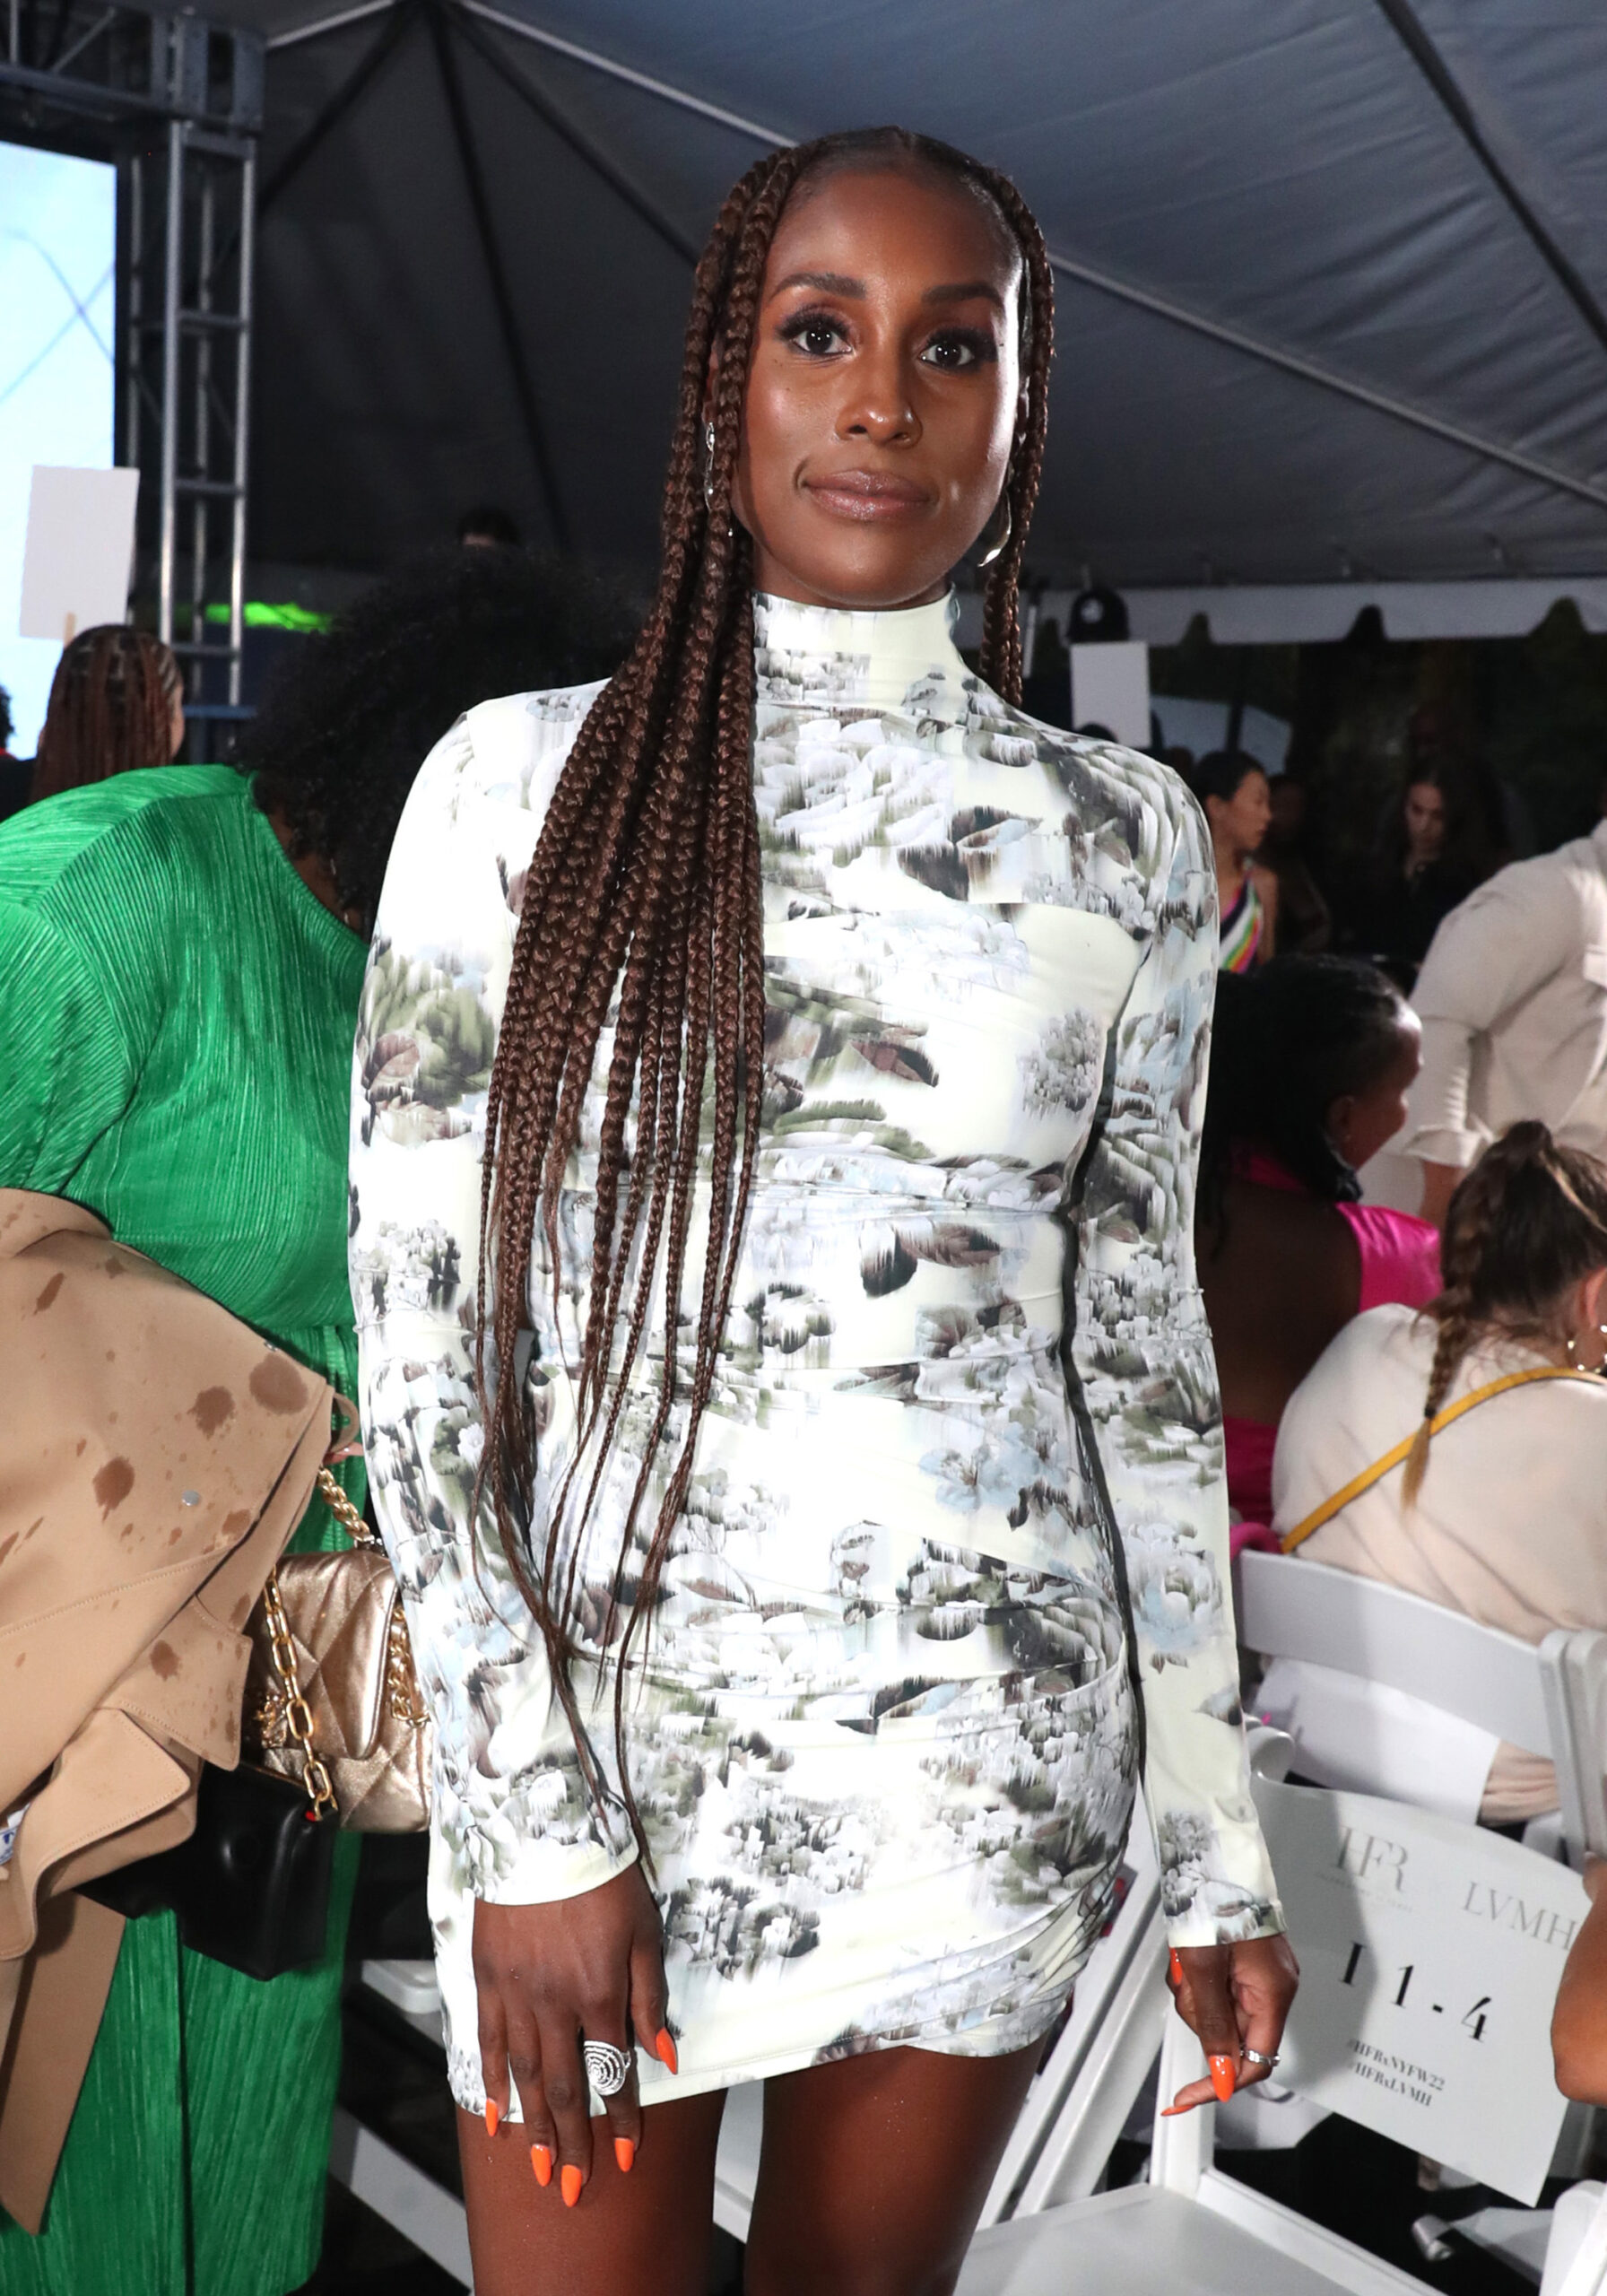 Issa Rae Loves The ‘Contagious’ Energy Of Gen-Z When It Comes To Style And Fashion